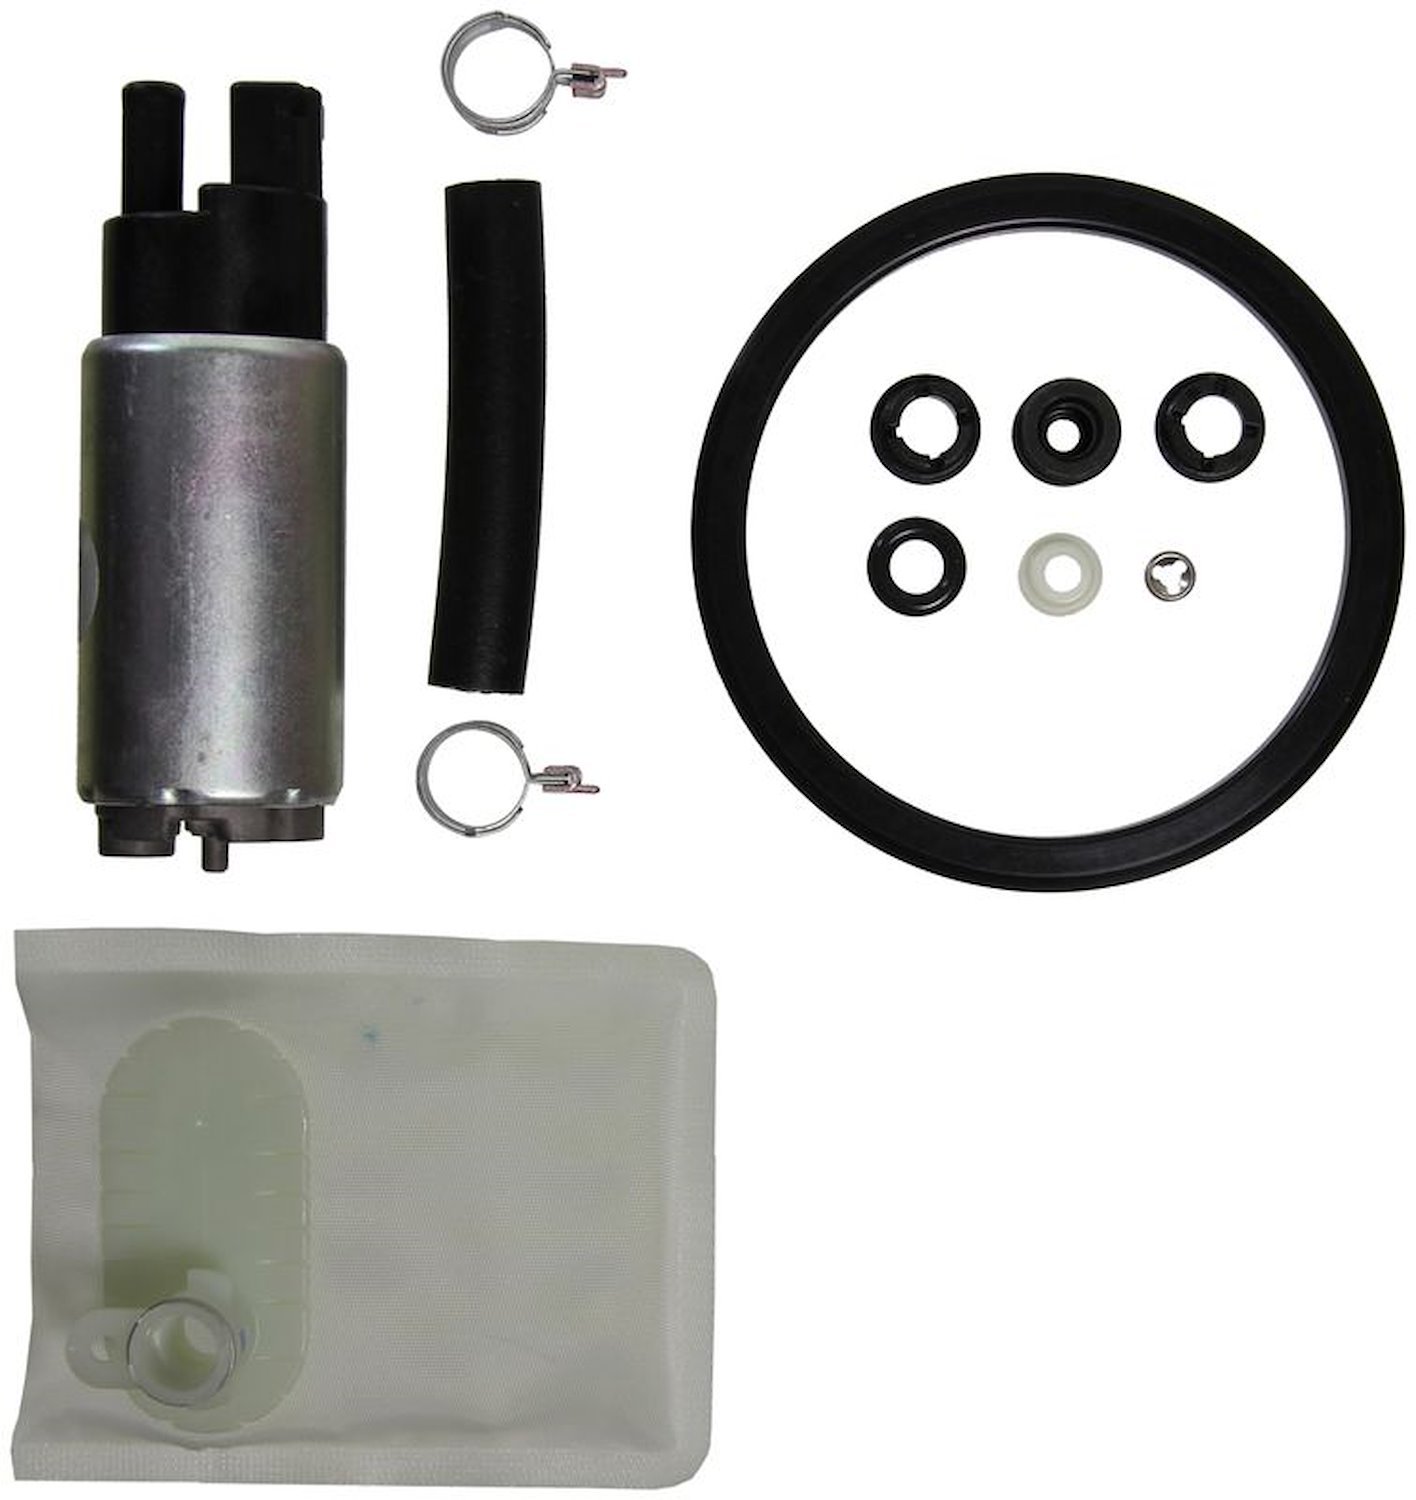 EFI In-Tank Electric Fuel Pump And Strainer Set for 2003-2007 Honda Accord